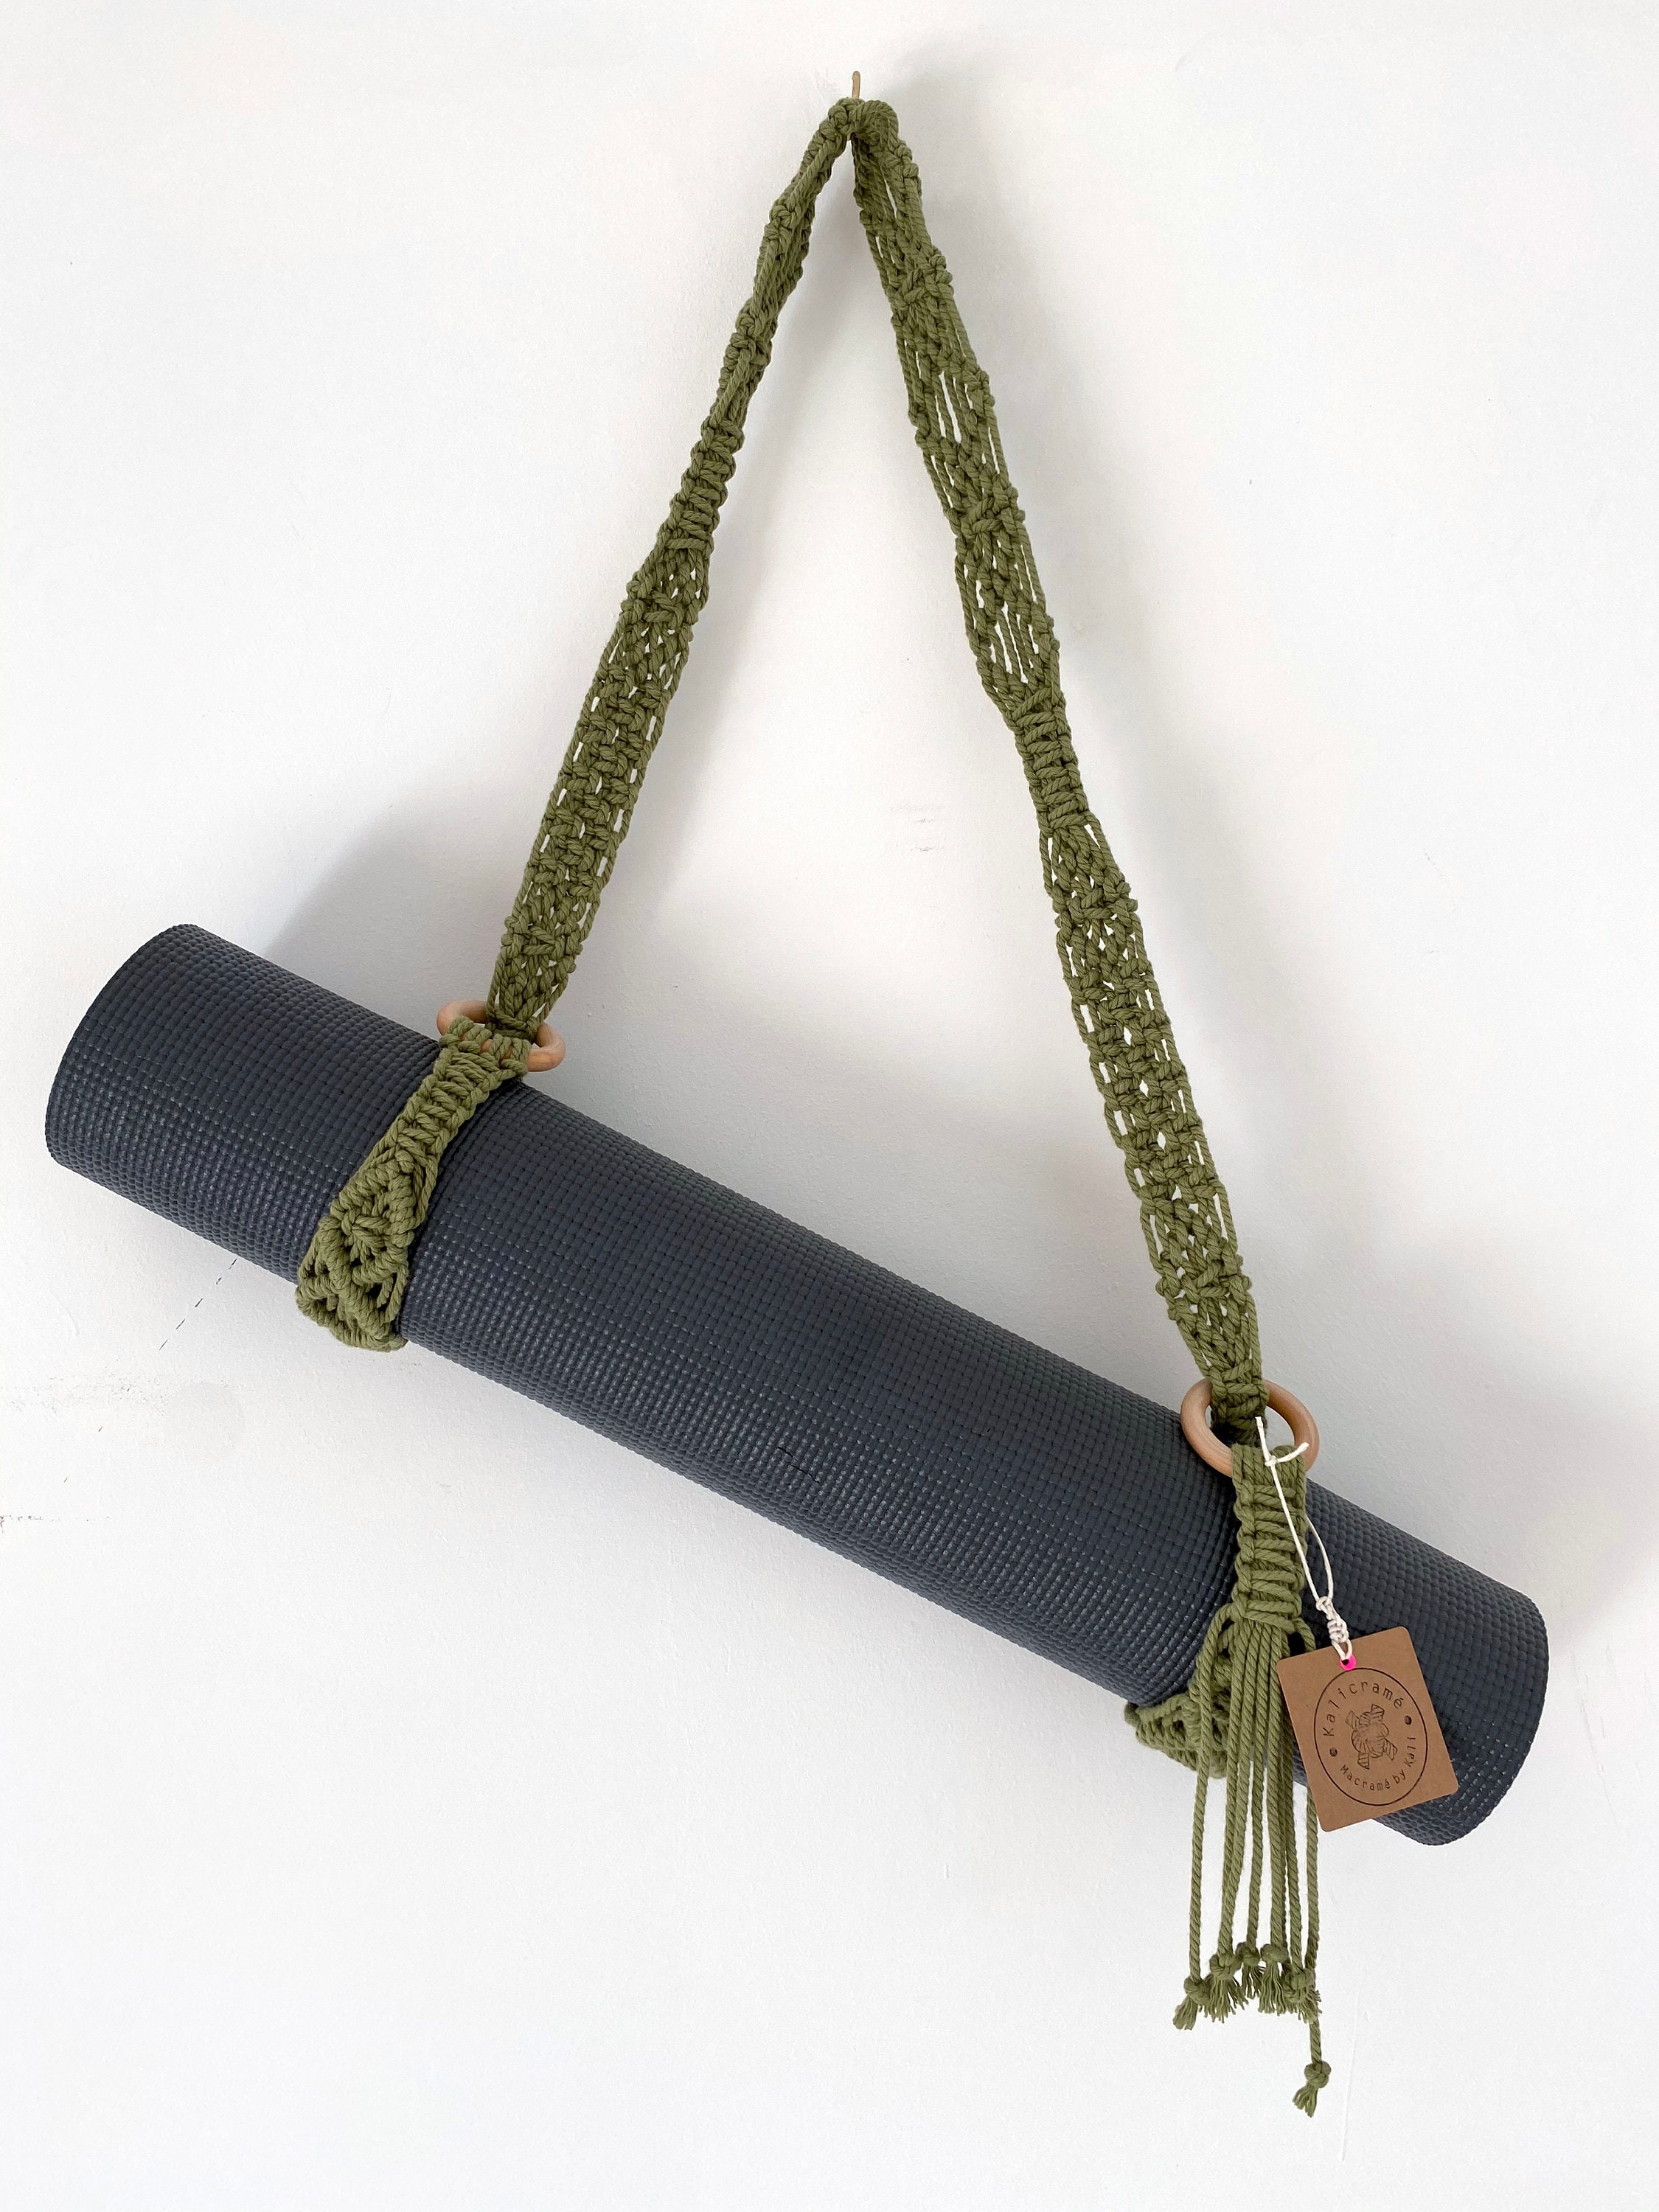 DIY Yoga Mat Strap - CHARM IT Spot! - Best Charms and Charm